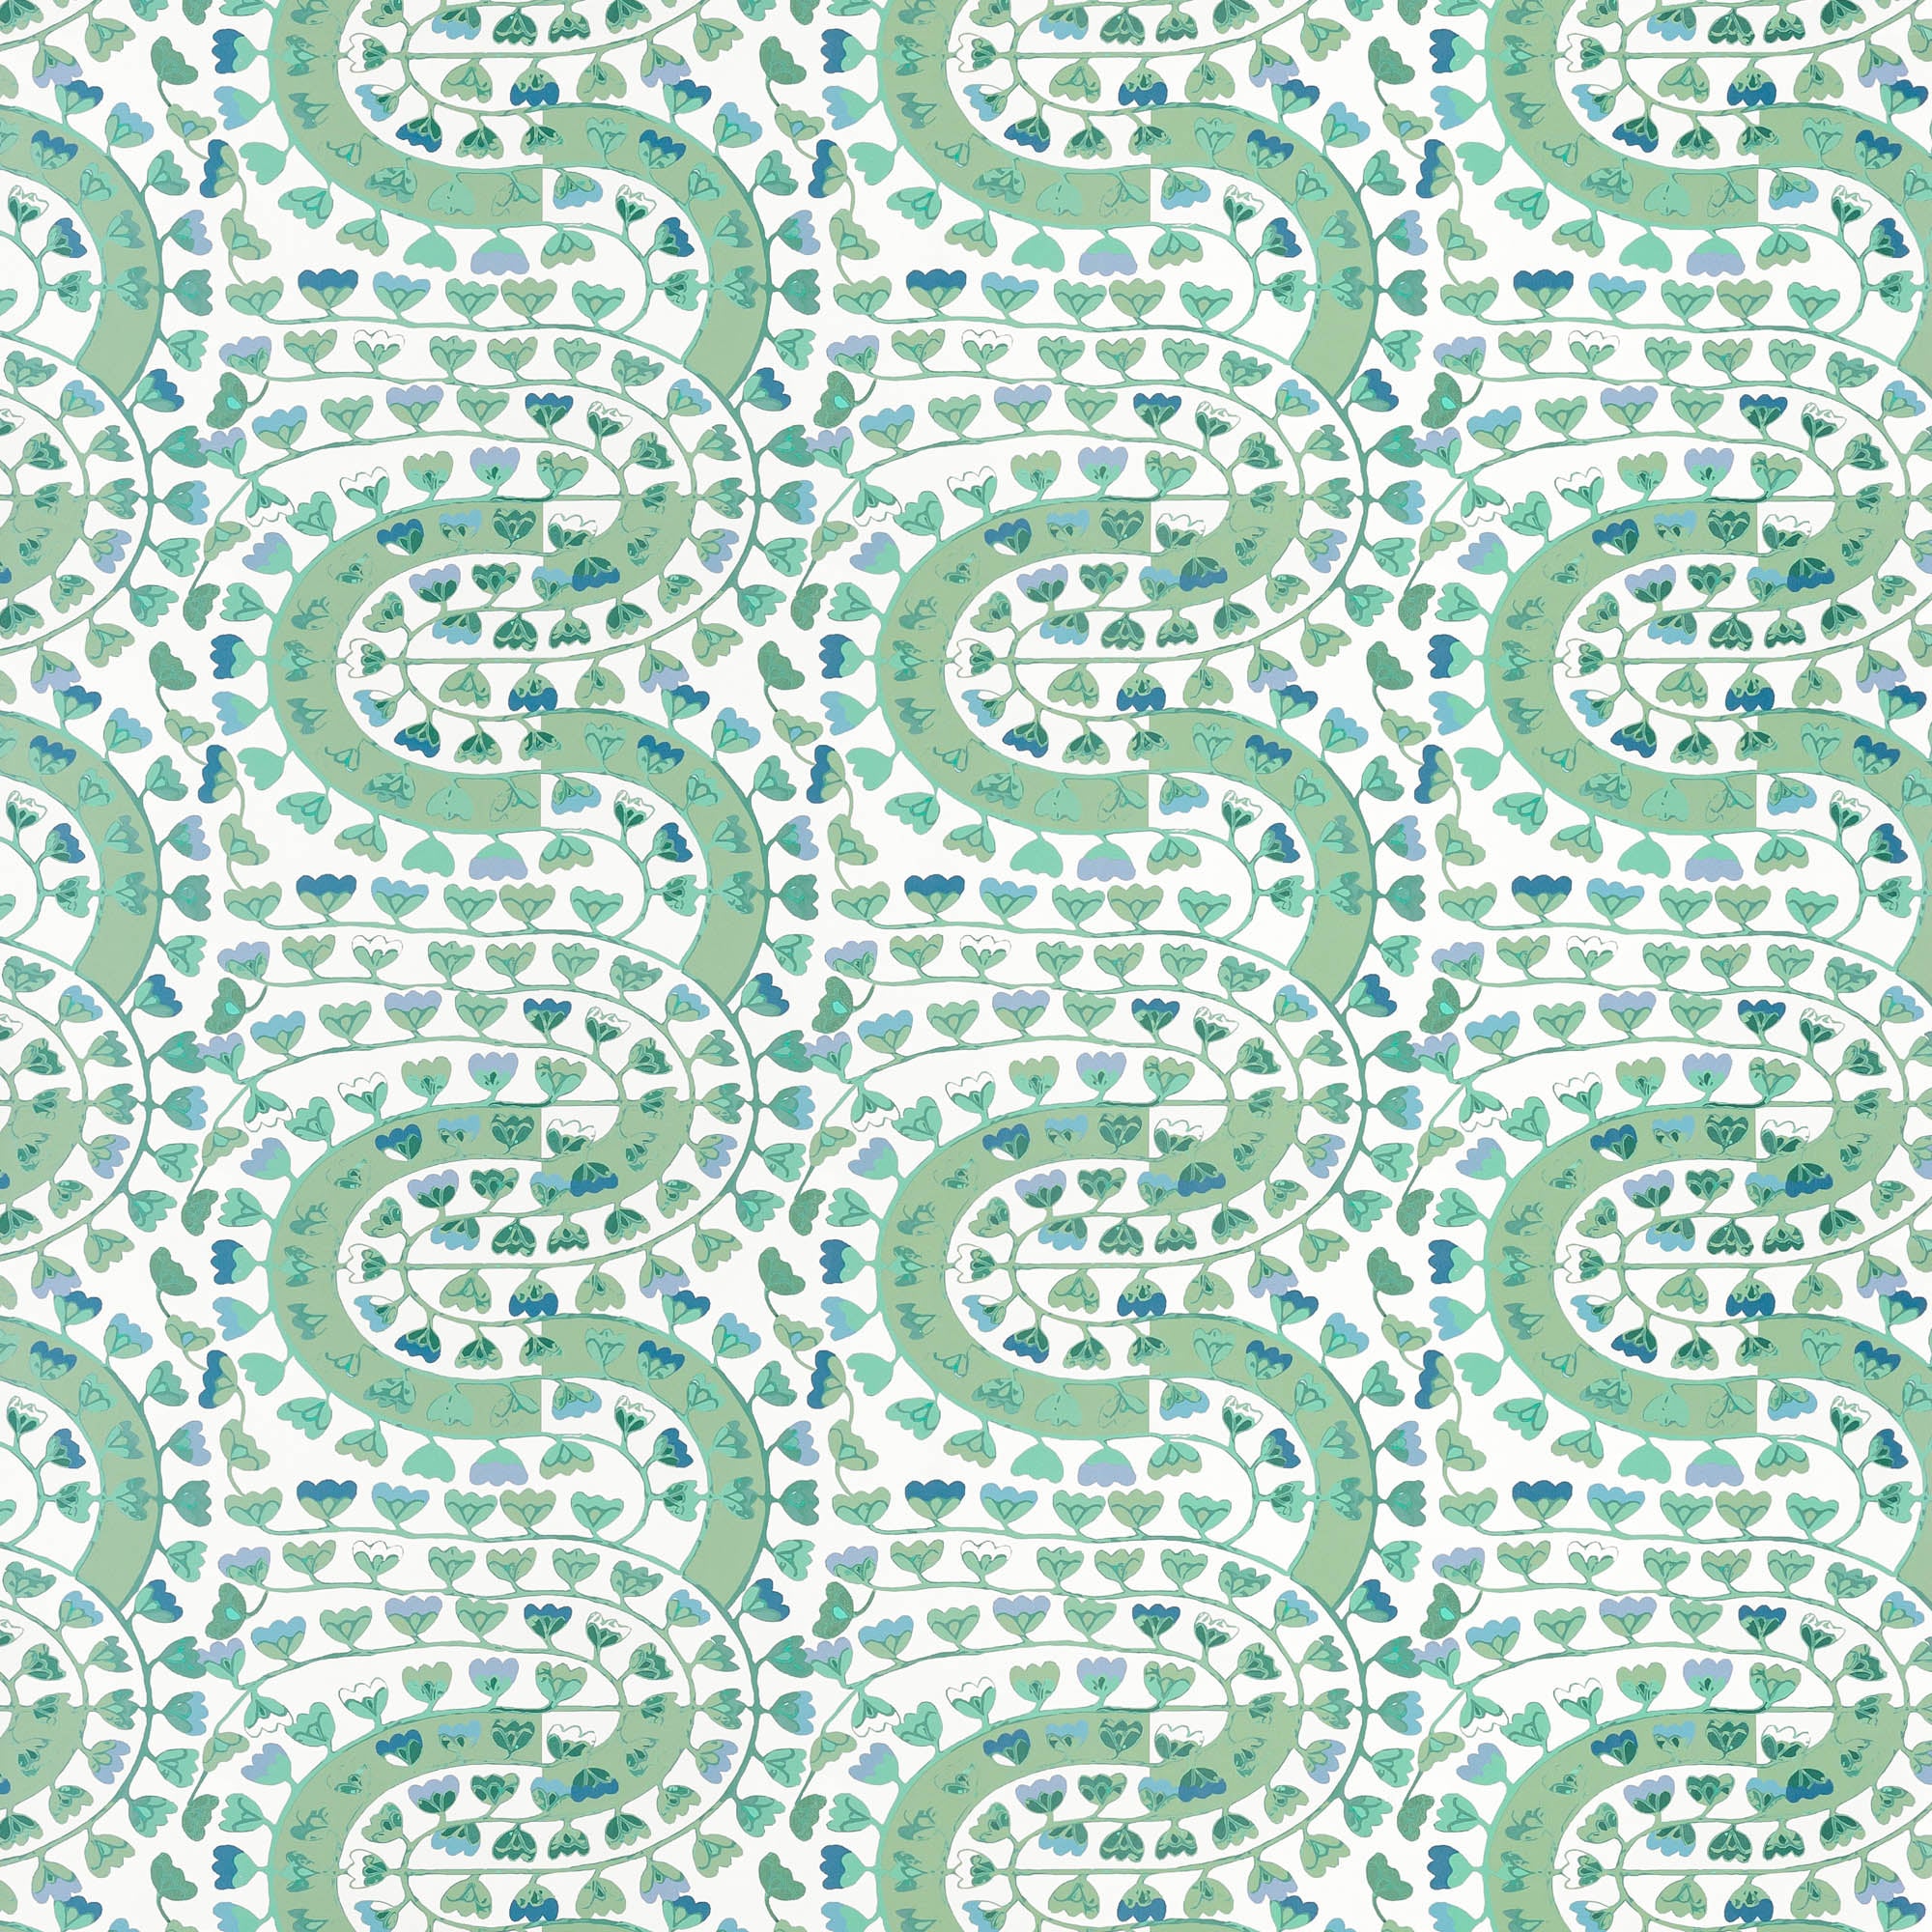 Detail of wallpaper in a meandering botanical stripe in shades of blue and green on a white field.